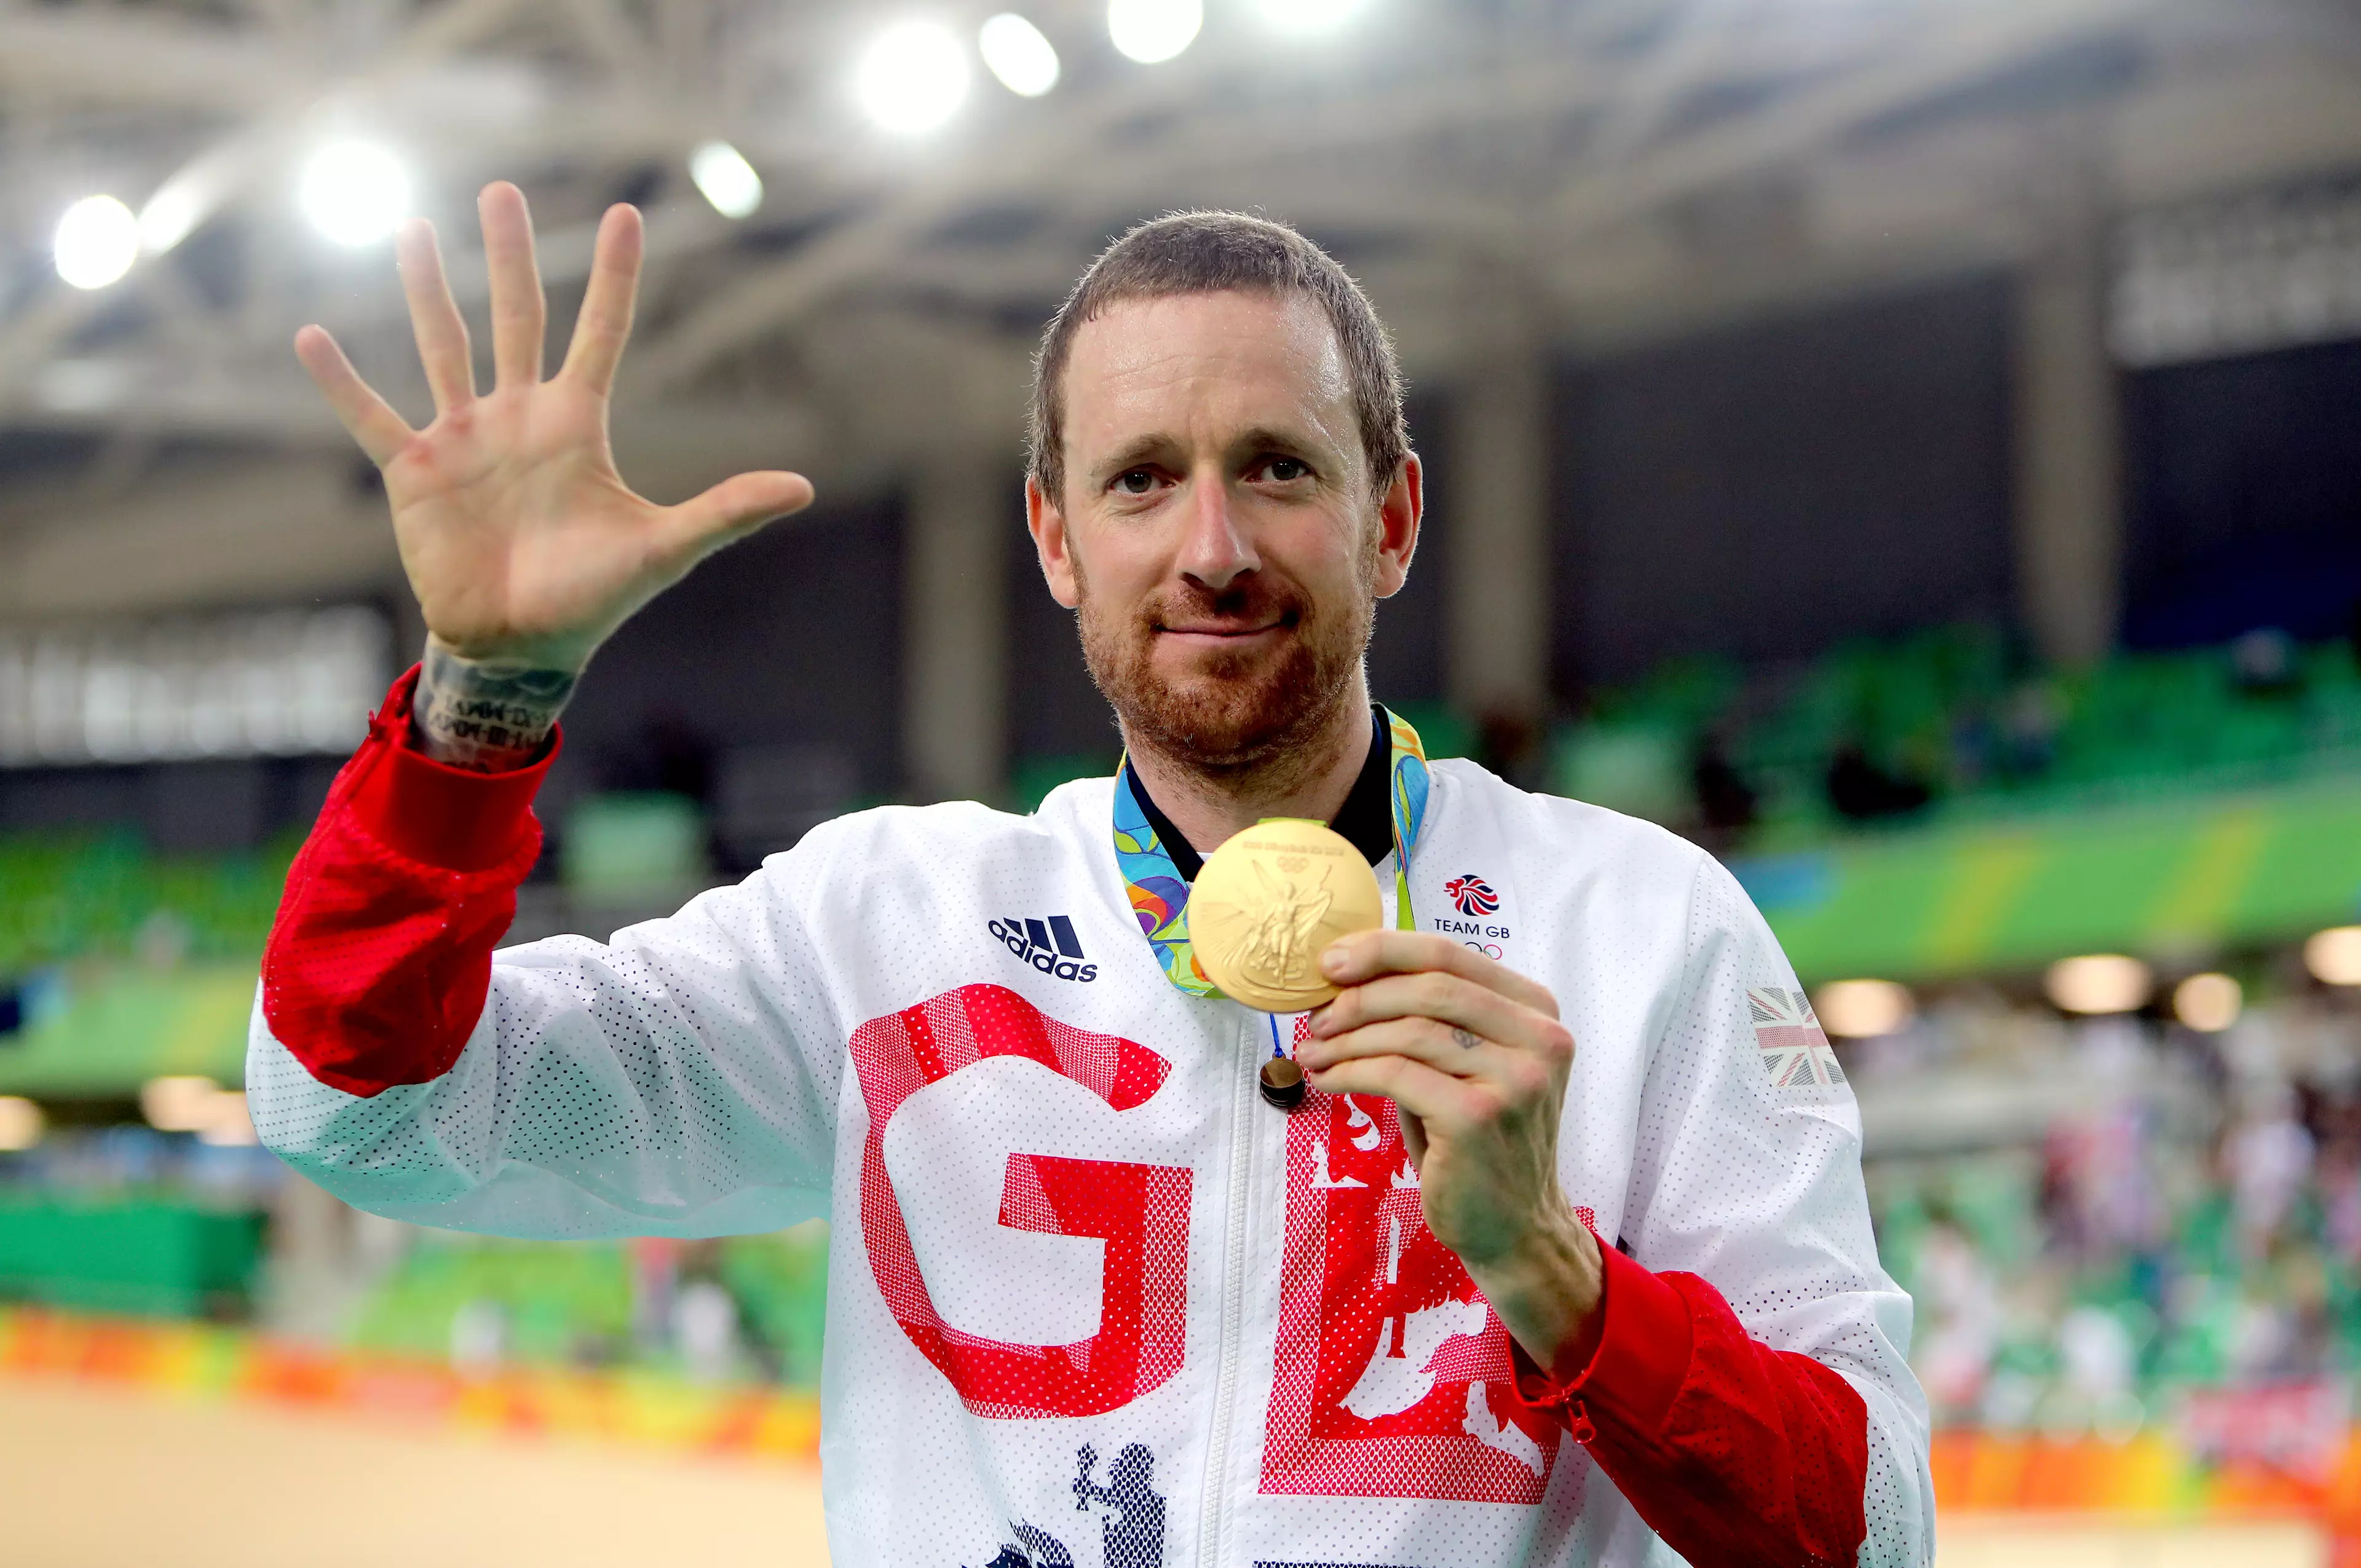 Bradley Wiggins Has Lost His Latest Gold Medal